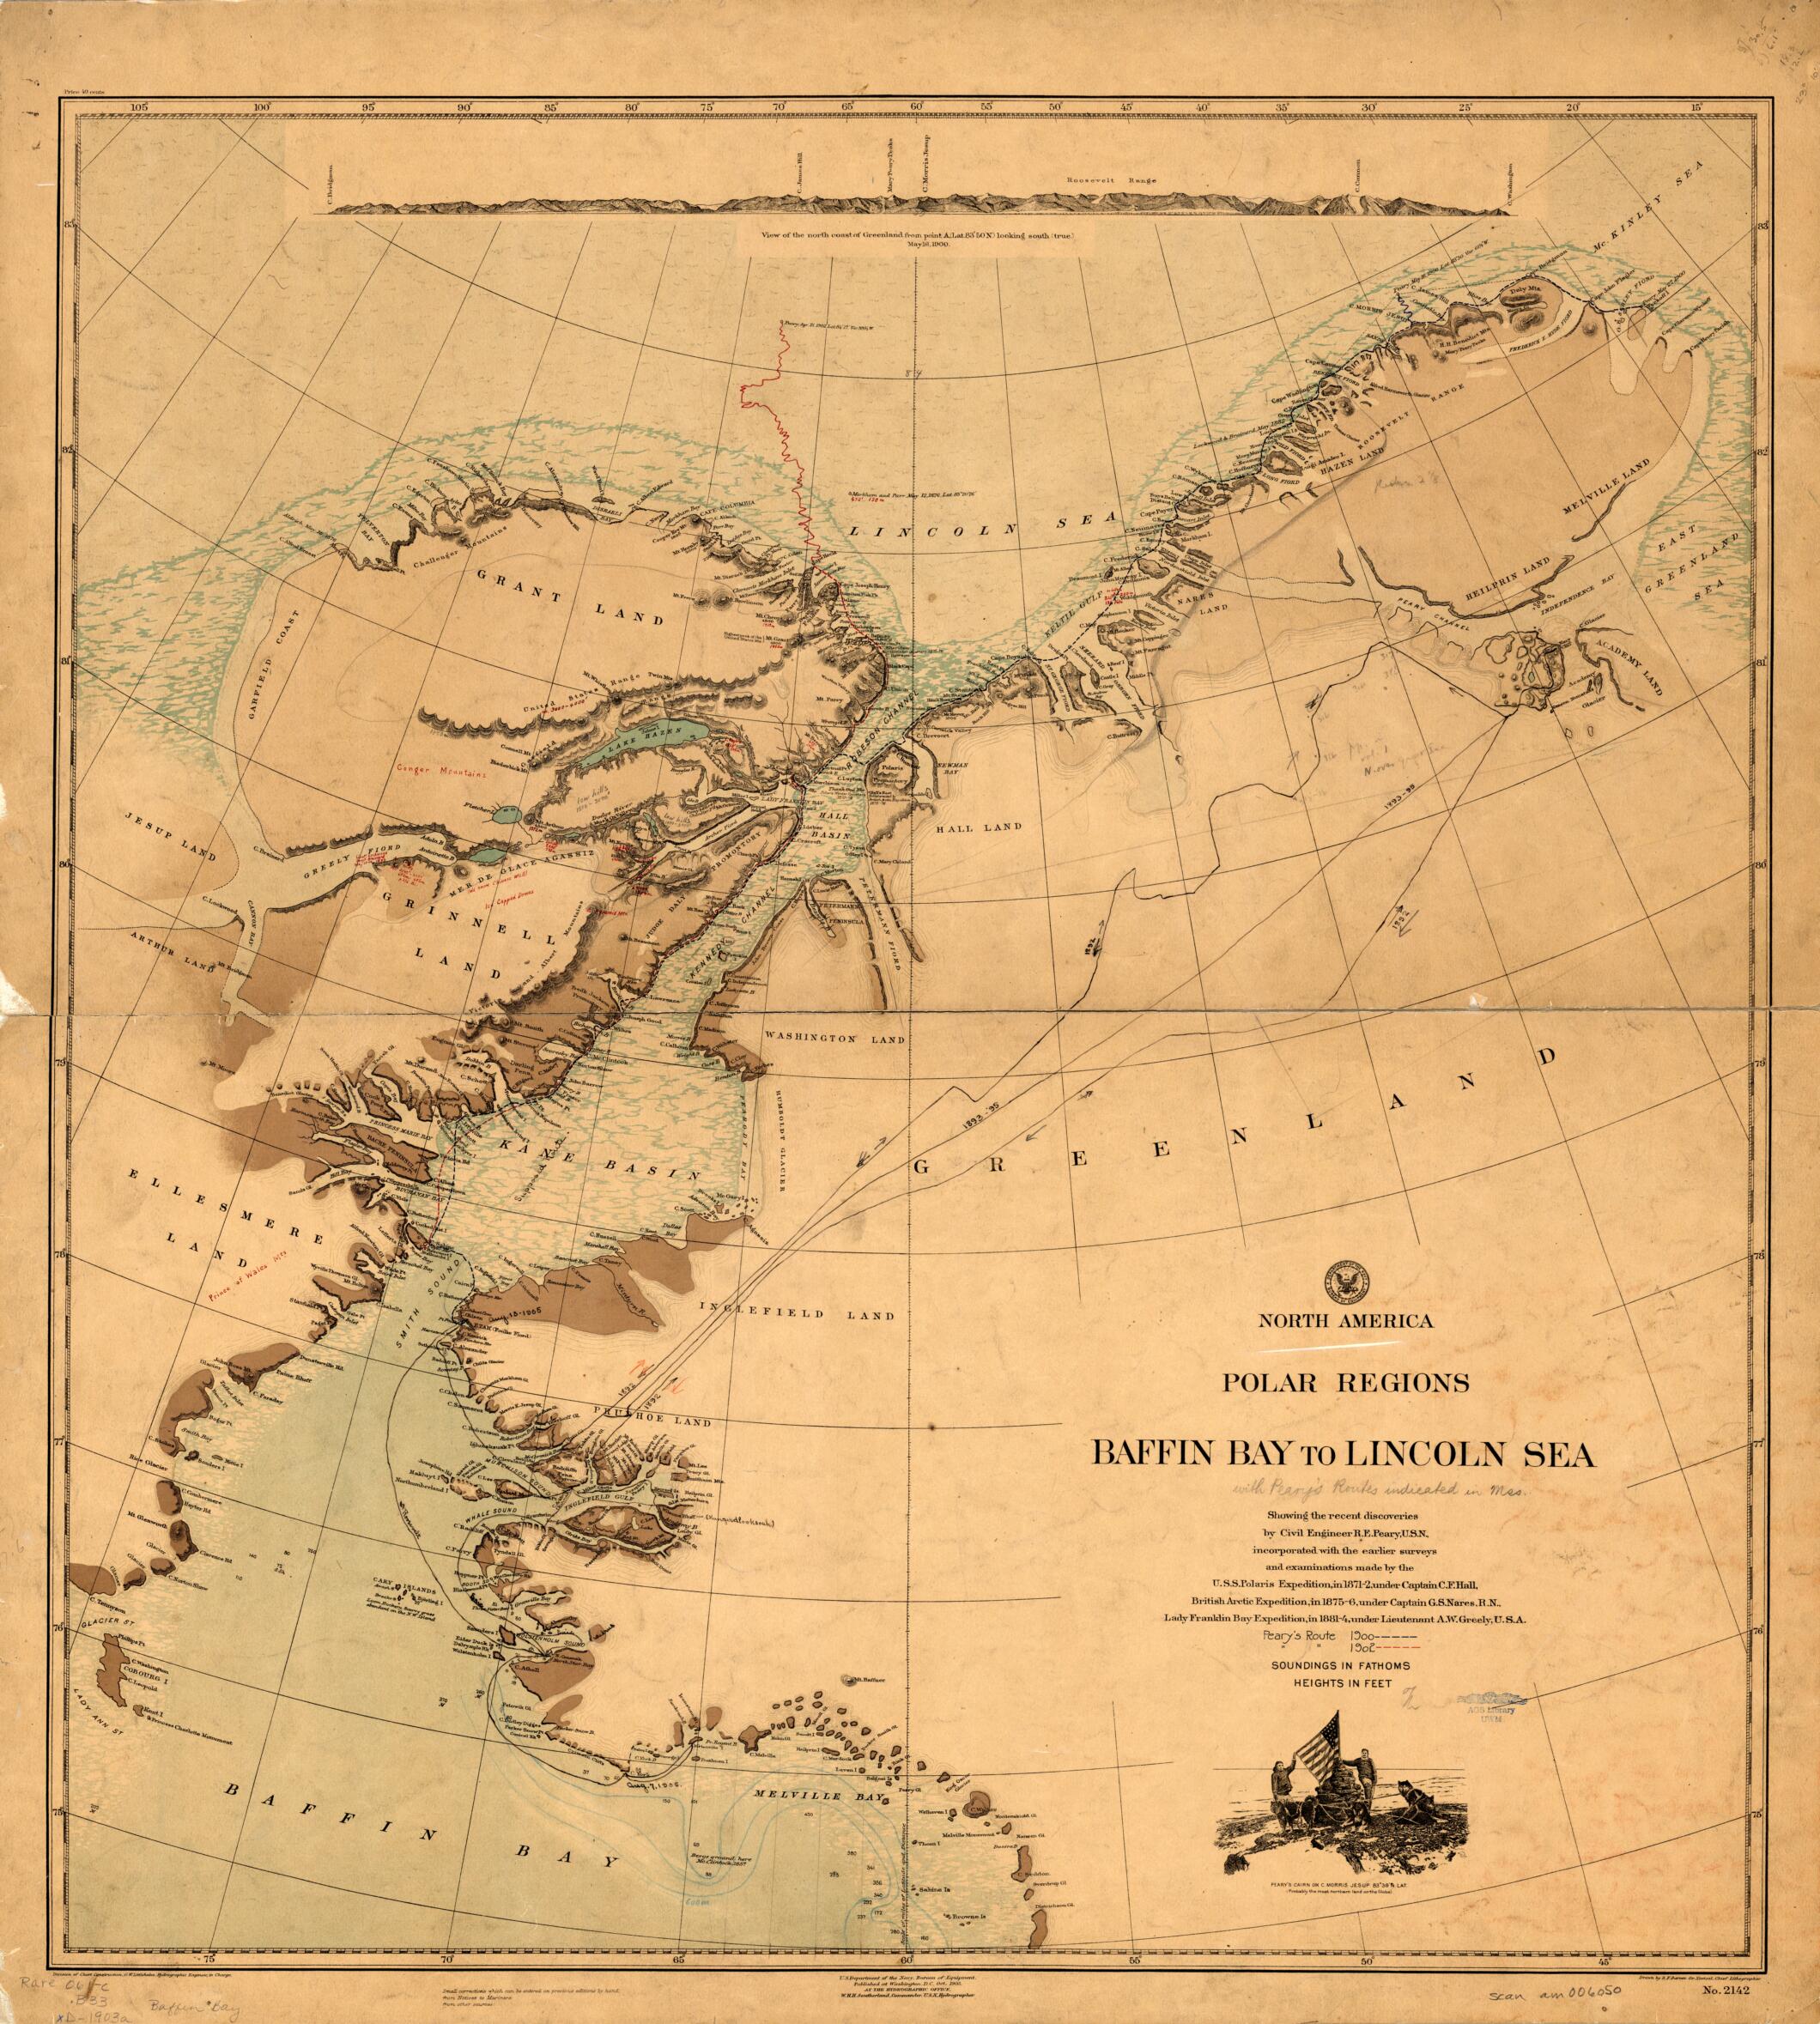 This old map of North America Polar Regions, Baffin Bay to Lincoln Sea. (North America Polar Regions Baffin Bay to Lincoln Sea) from 1903 was created by R. F. Barnes, Gregor Noetzel, William Henry Hudson Southerland,  United States. Hydrographic Office. Division of Chart Construction in 1903